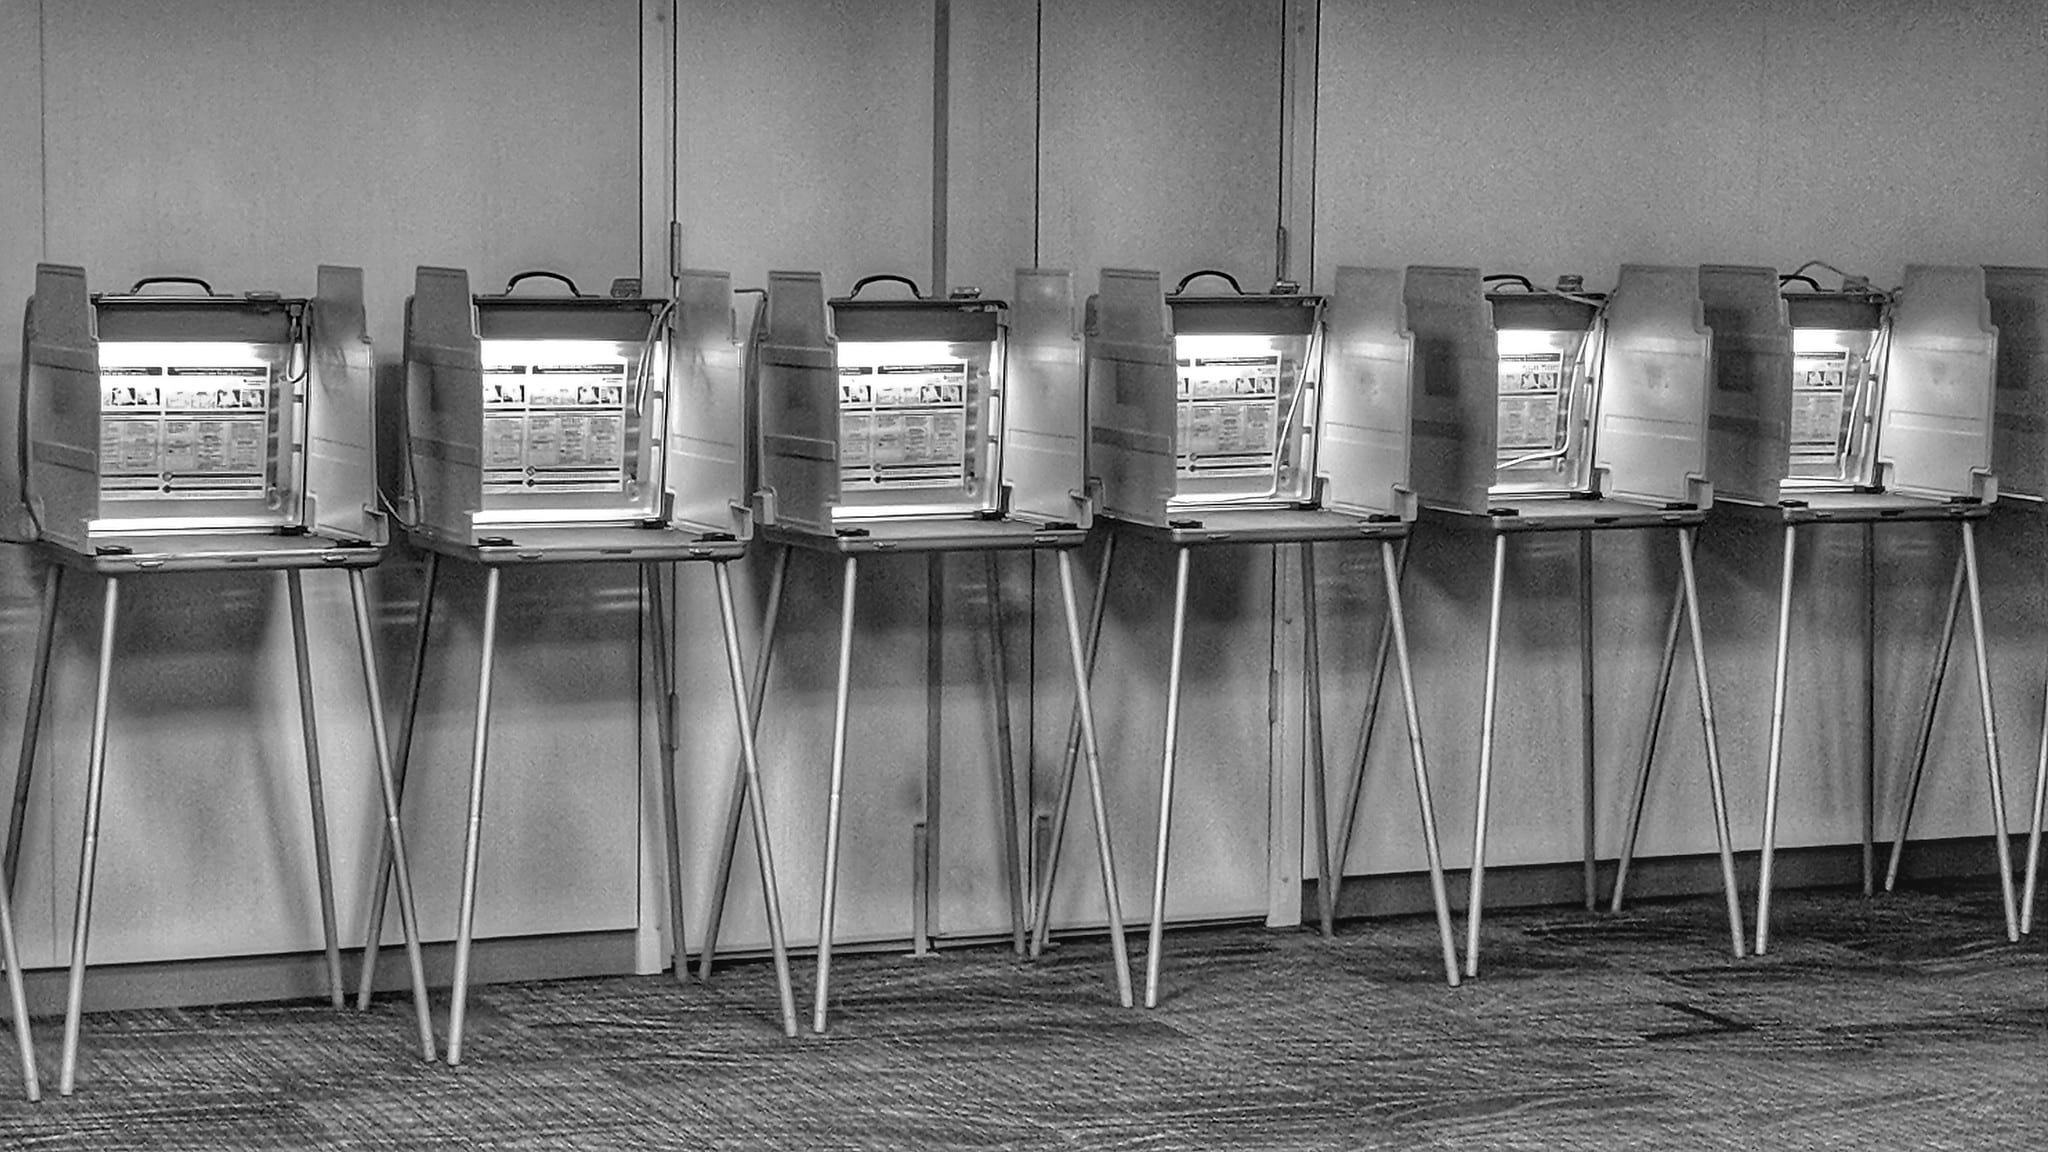 ELECTION SECURITY: The Threat to the Ballot and How to Fight Foreign Ops Homeland Security Today